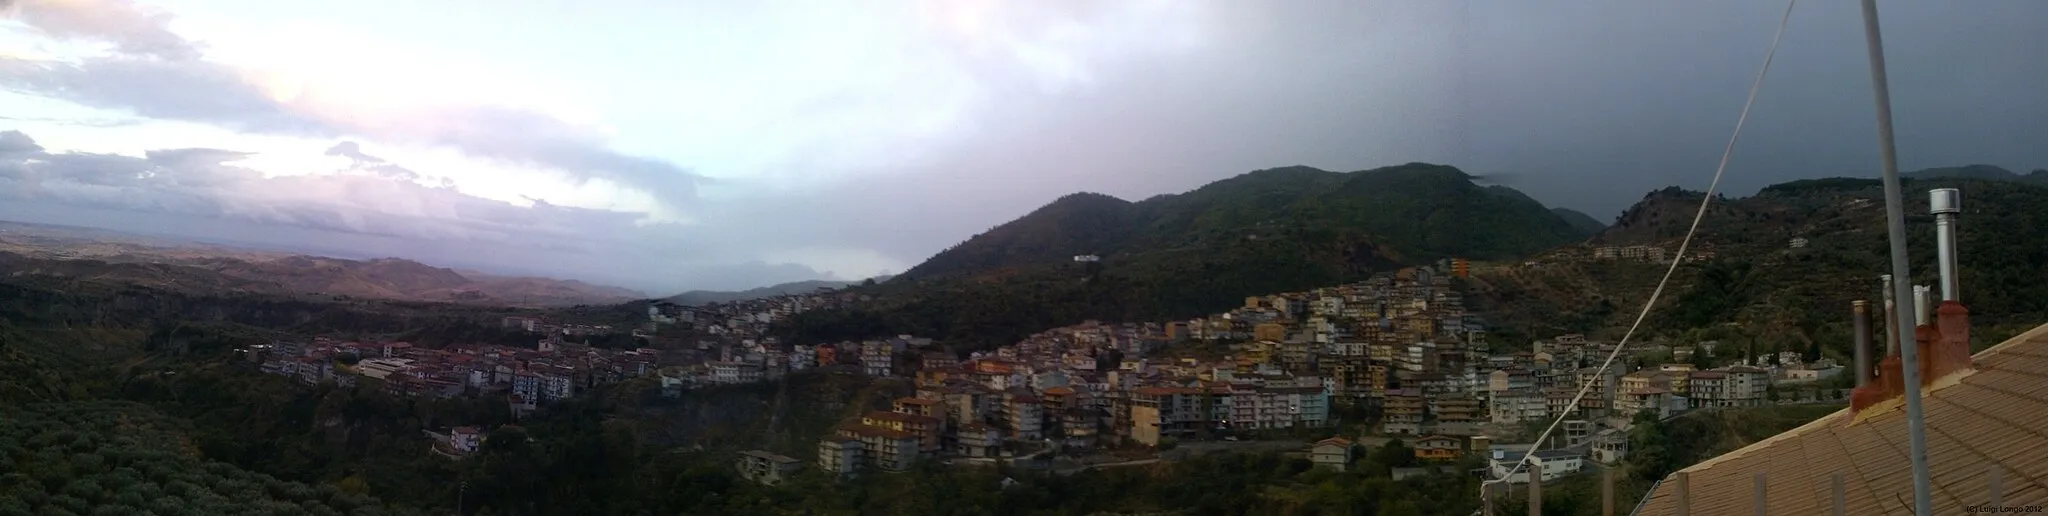 Photo showing: Panoramic view of Mesoraca, in Italy.